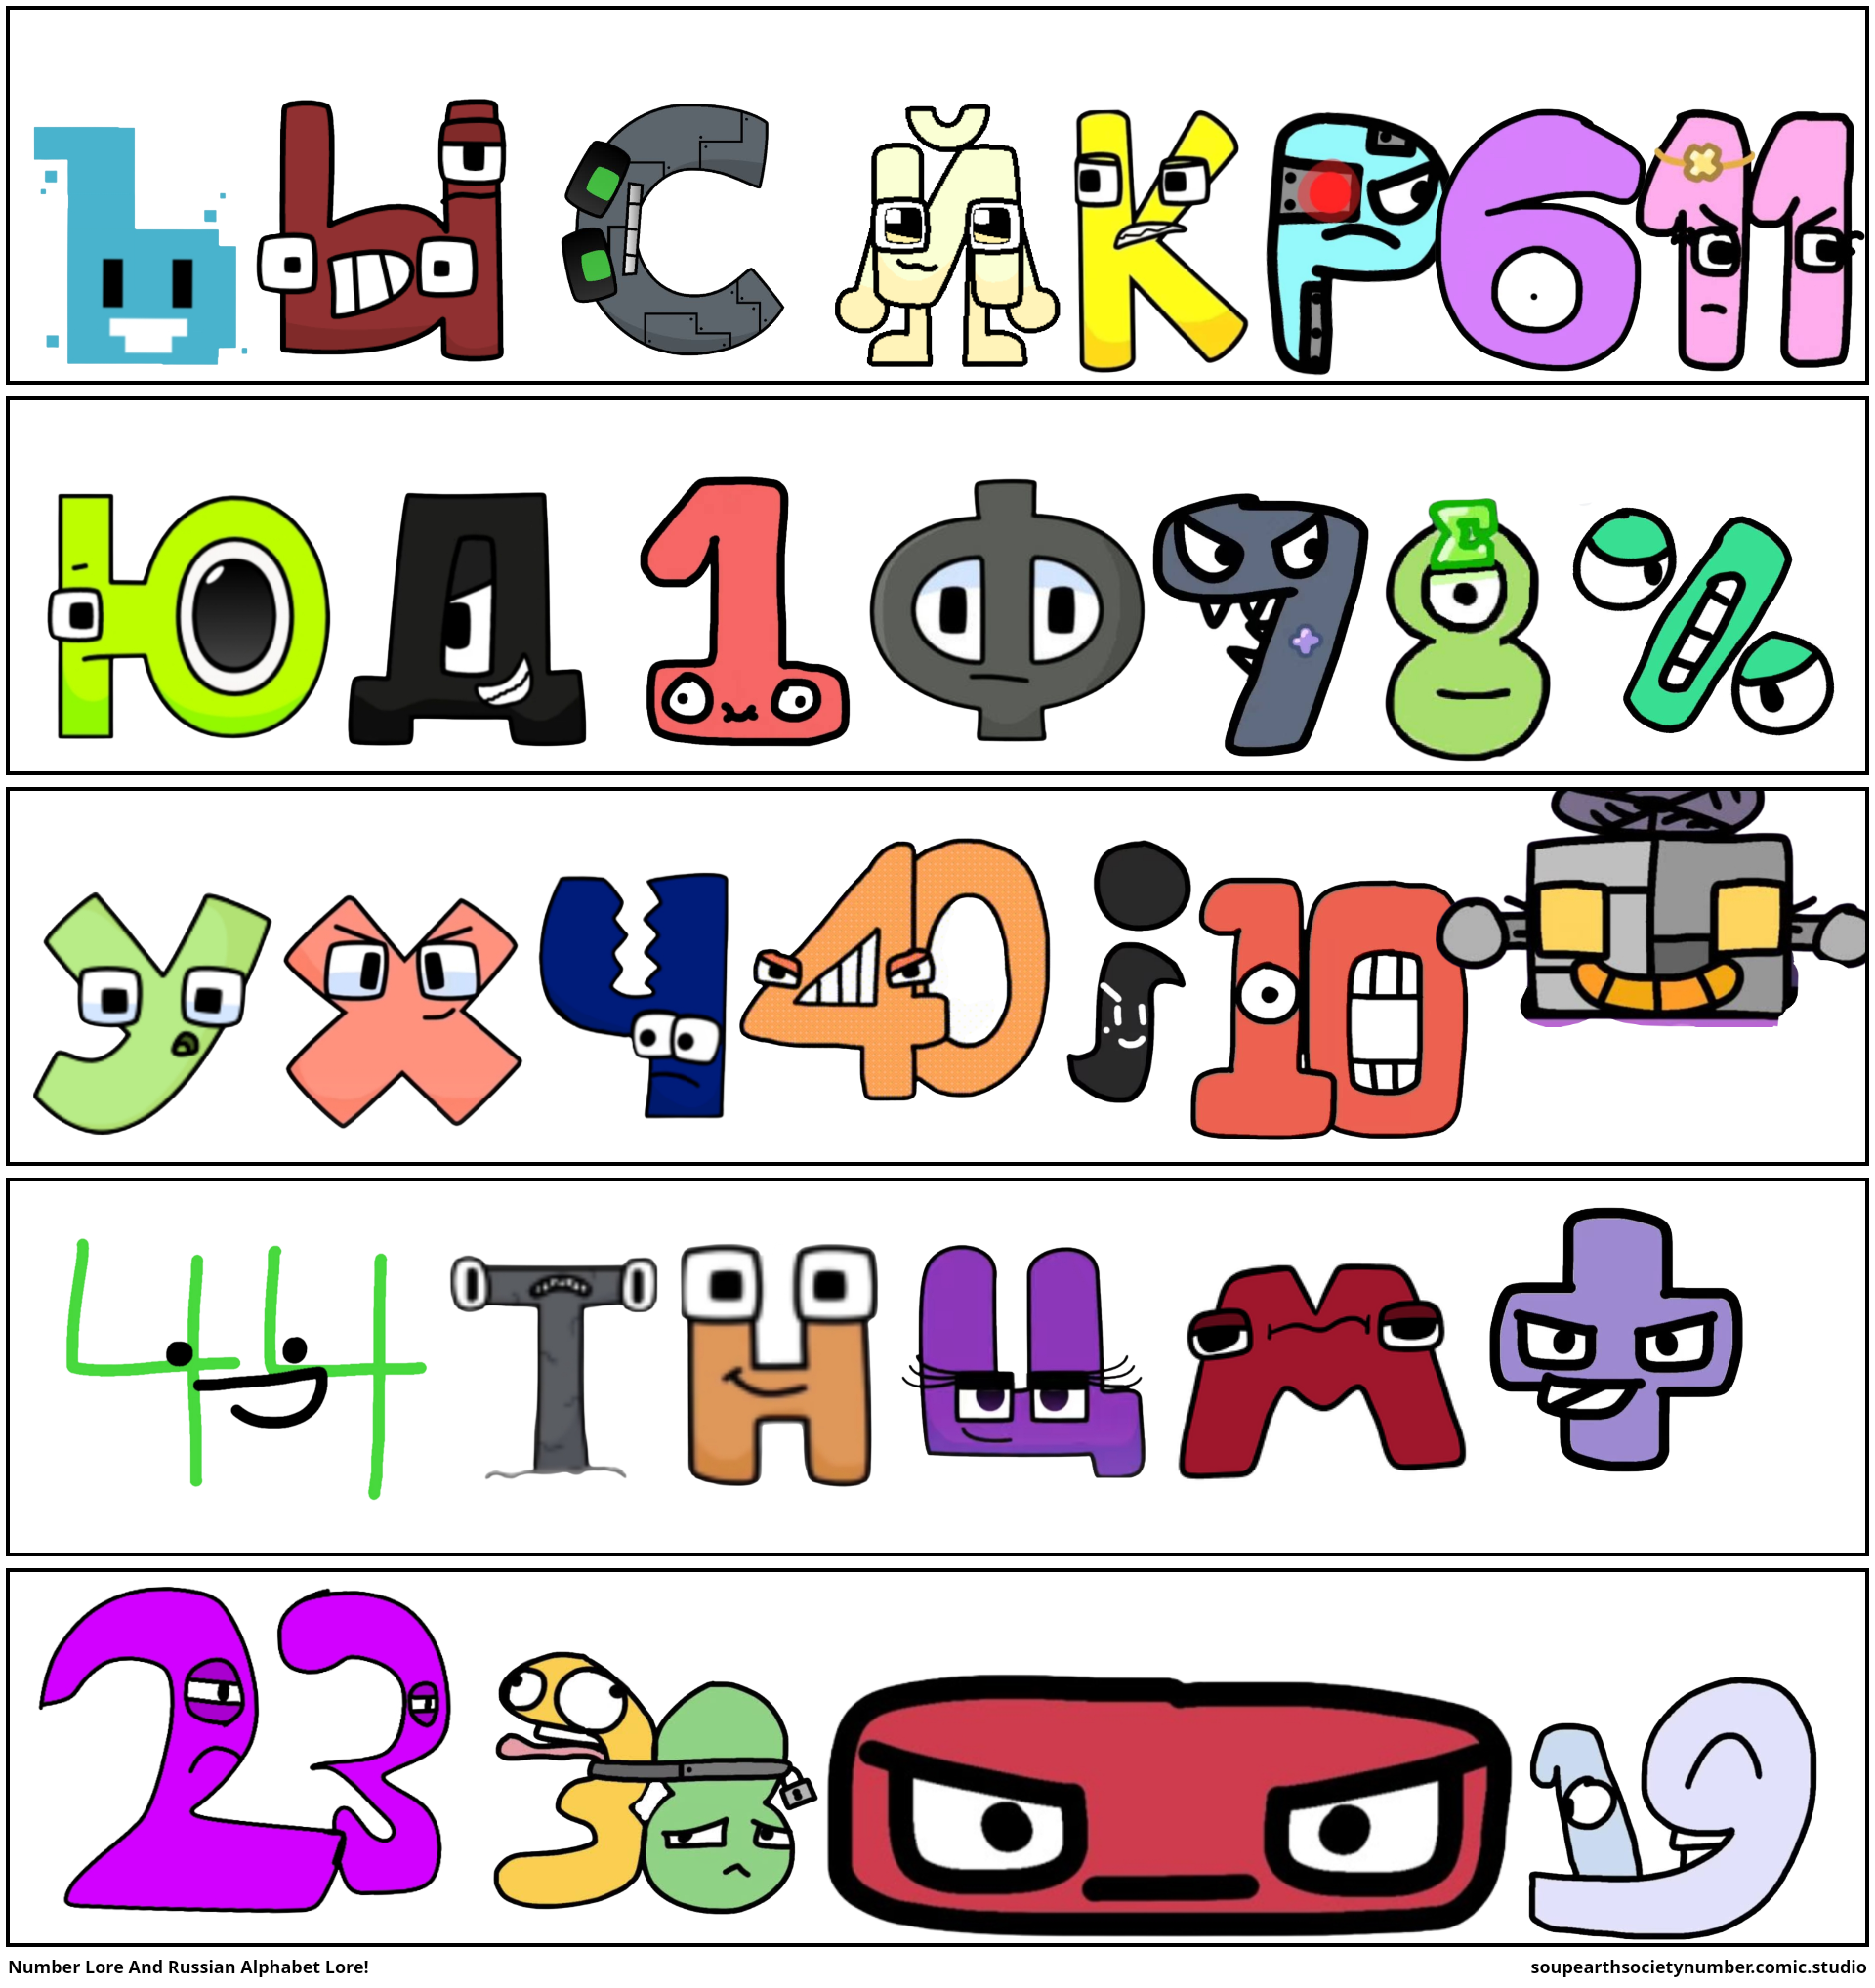 Russian Alphabet Lore But Everyone Is C ( Full Version ) 